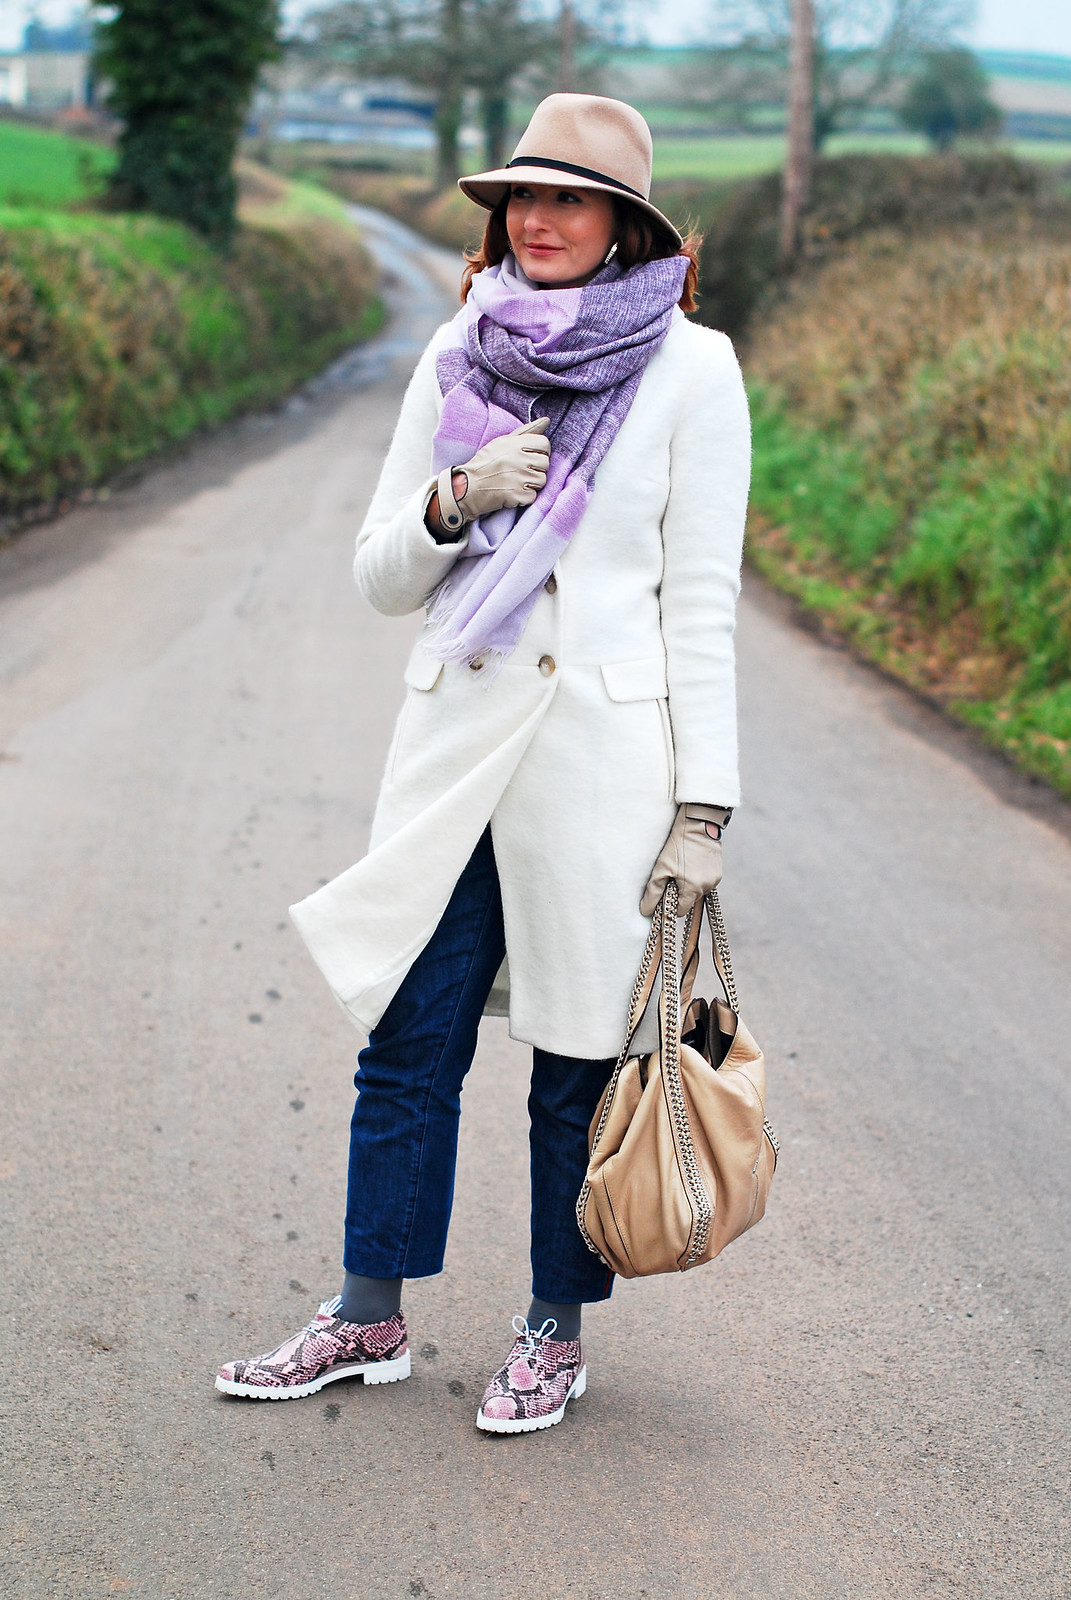 Cold weather outfit: Long white wool coat oversized lilac scarf camel fedora dark wash boyfriend jeans pink snakeskin lace up shoes | Not Dressed As Lamb, over 40 style